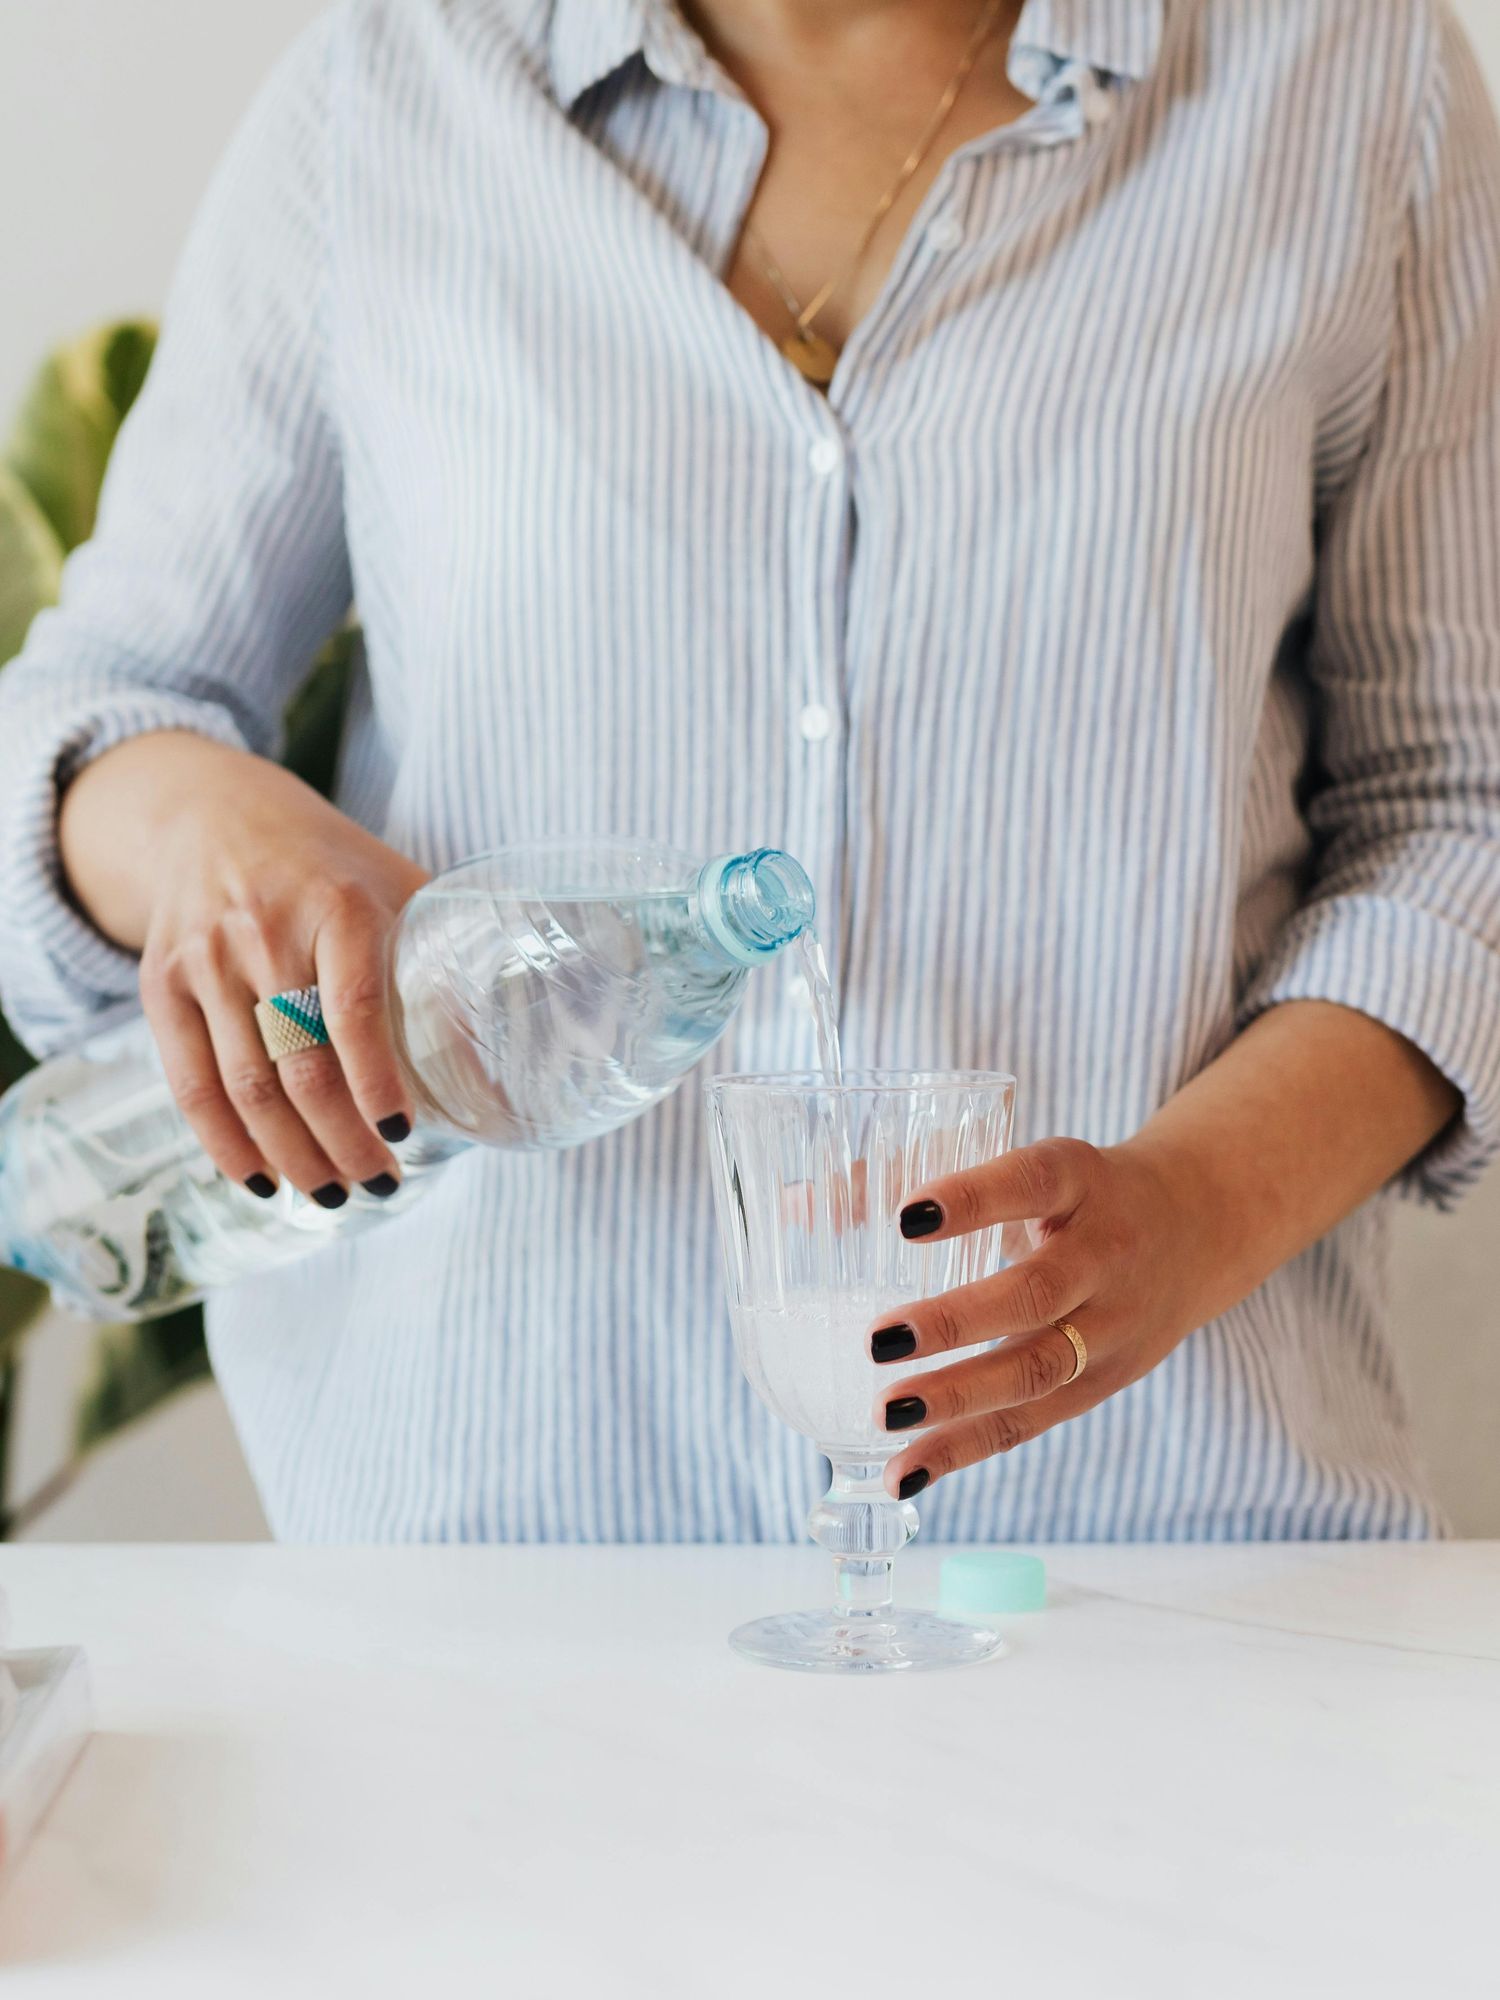 What are the top 5 worst bottled waters?